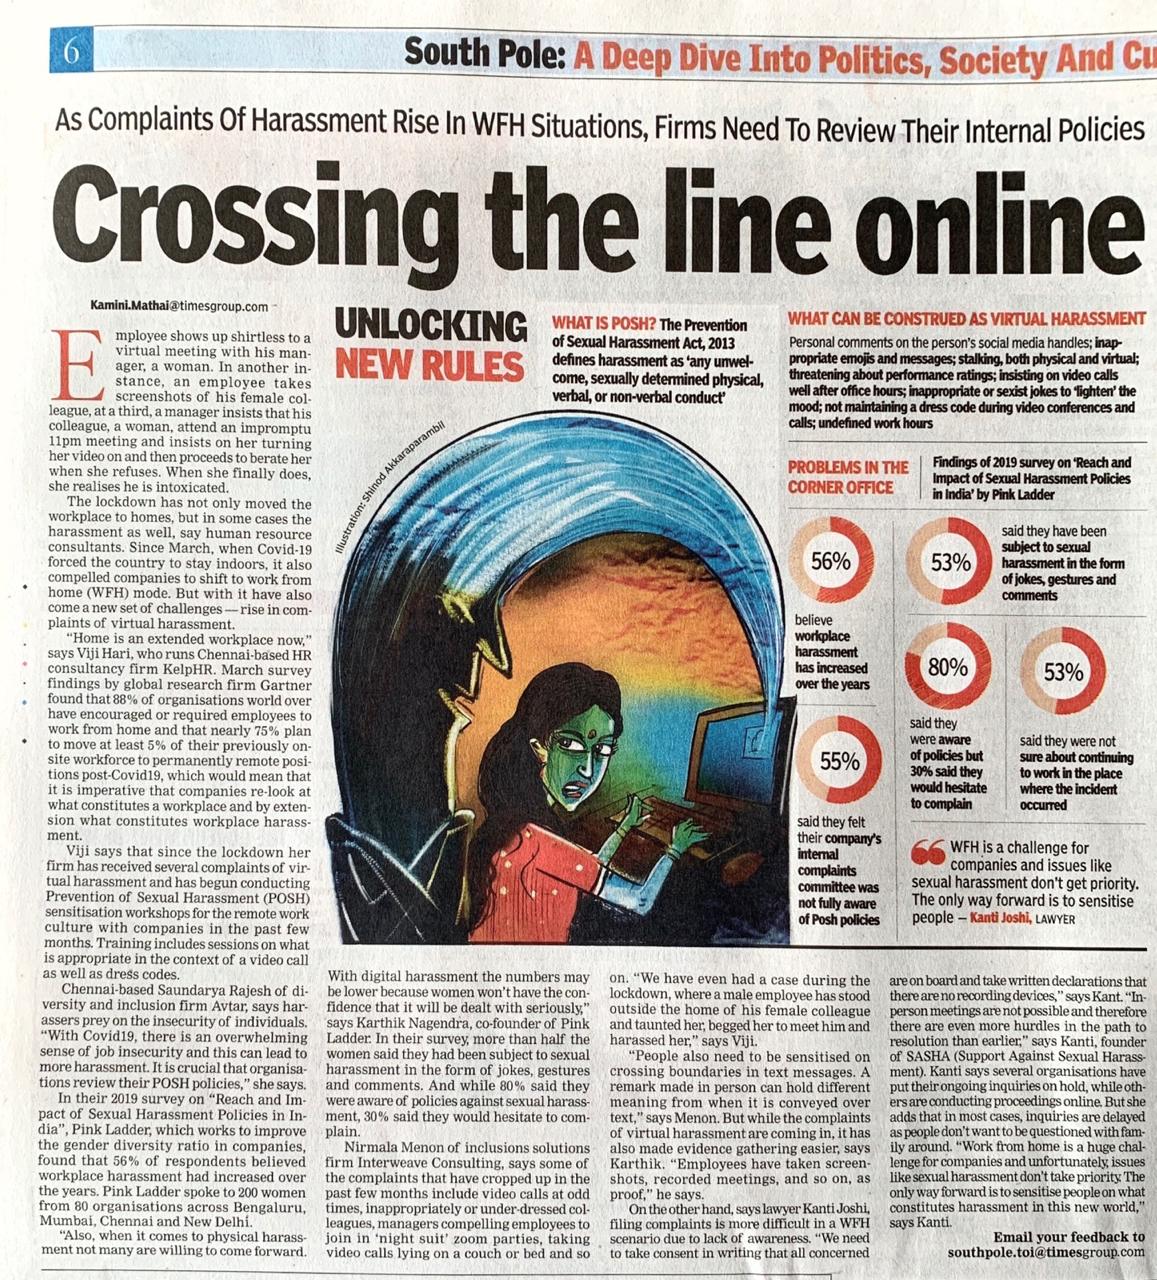 Crossing the line online - Viji Hari shares her thoughts with TOI on the different forms of Sexual harassment issues faced by organisations while WFH